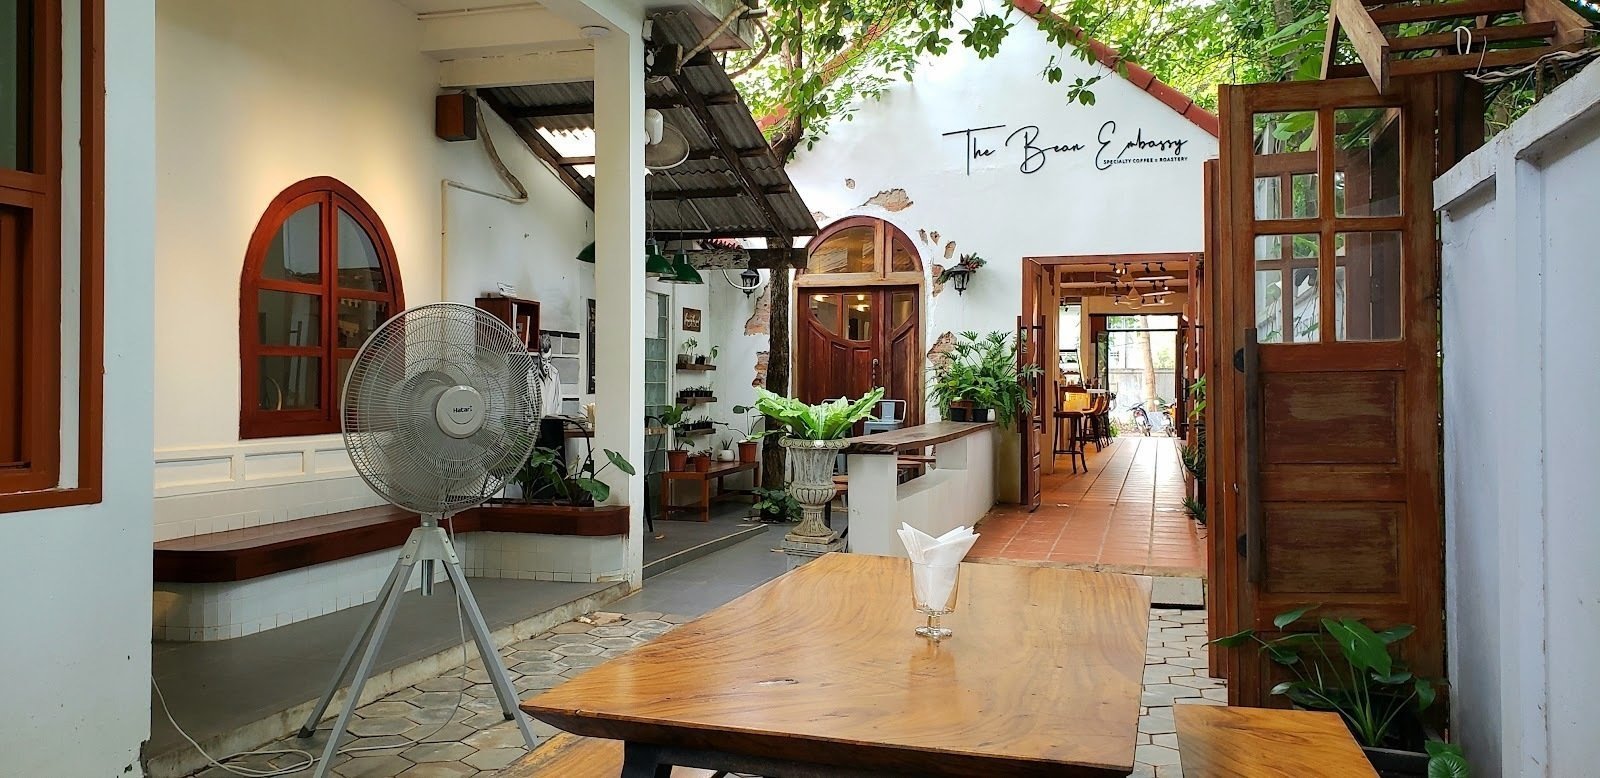 <span class="translation_missing" title="translation missing: en.meta.location_title, location_name: The Bean Embassy, city: Siem Reap">Location Title</span>